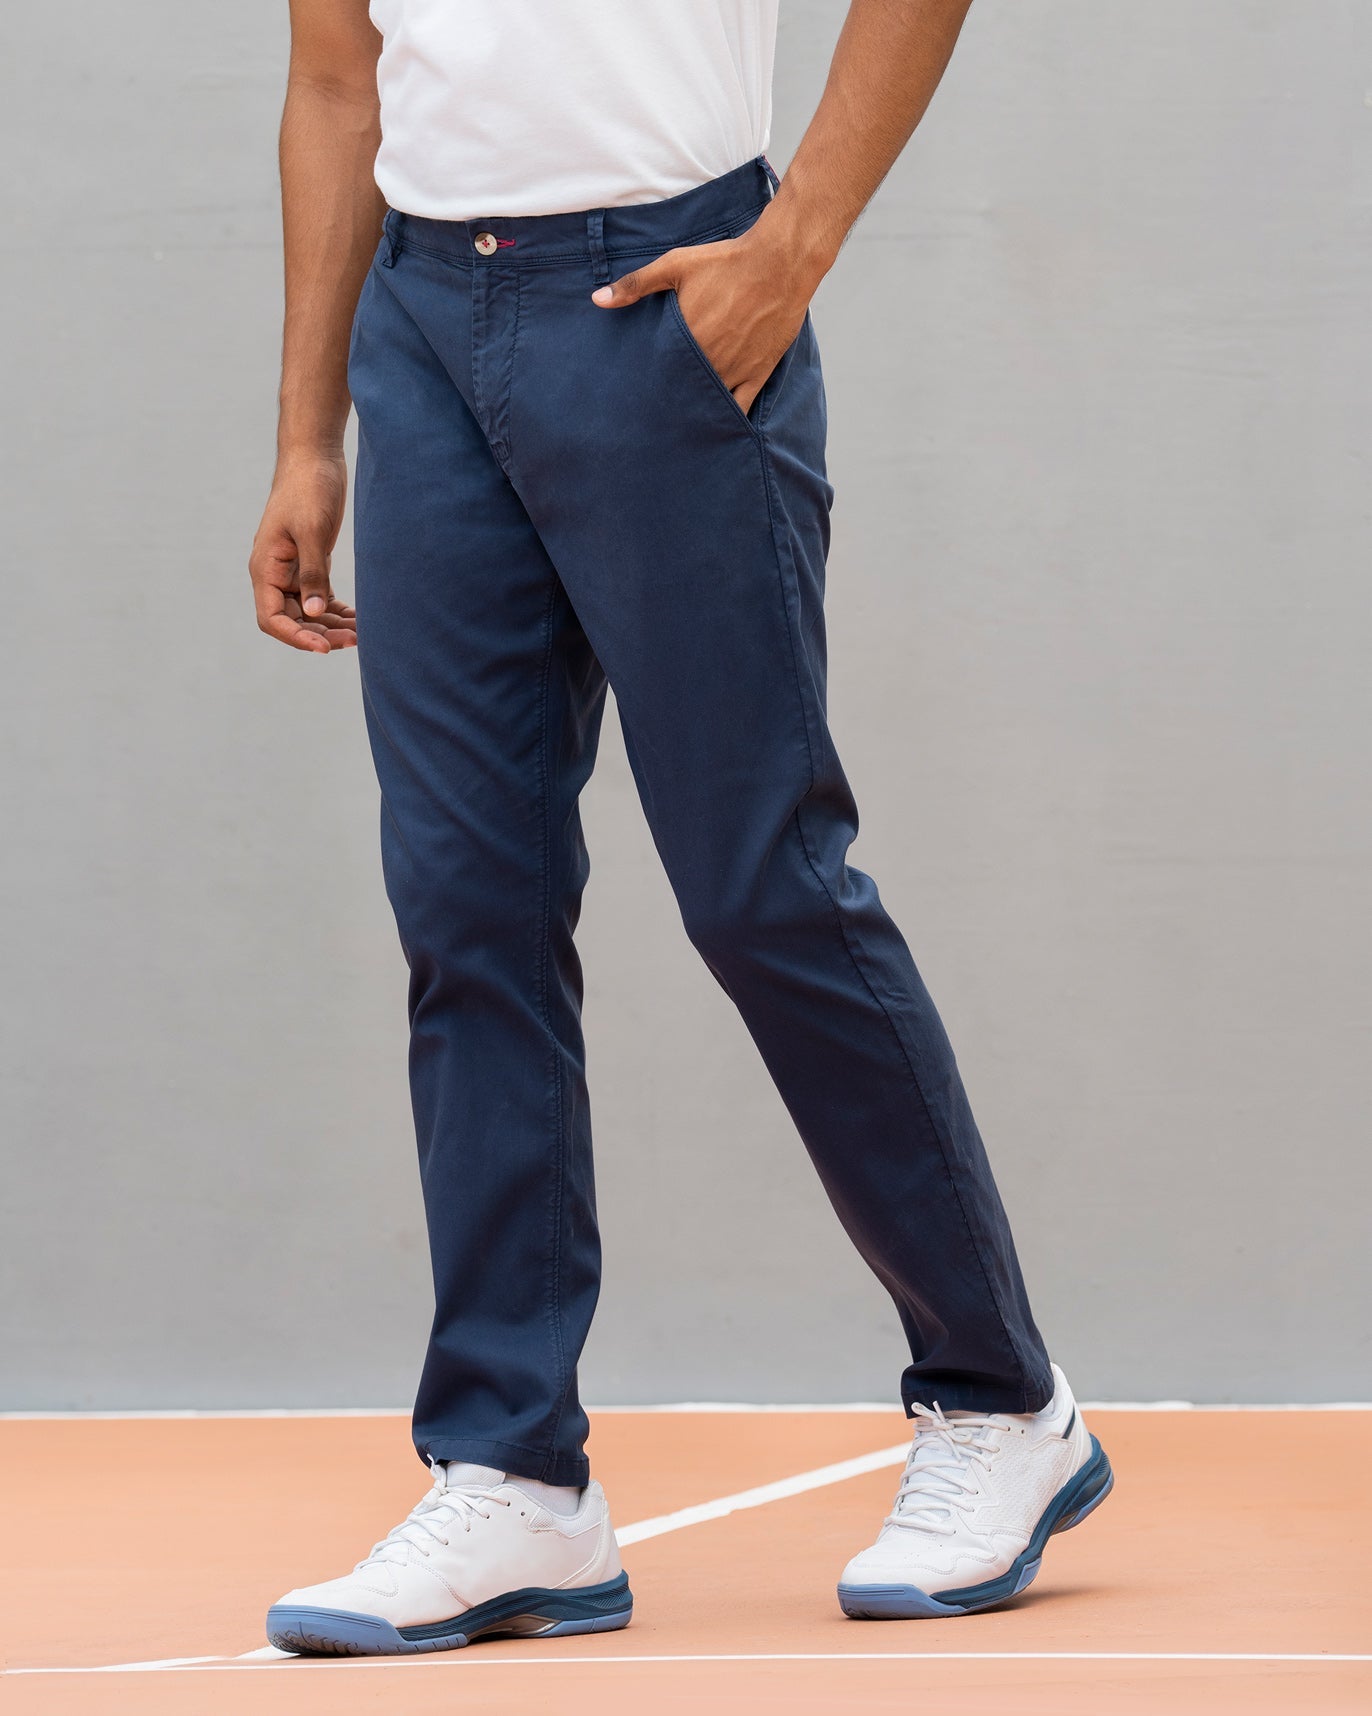 Ace Golf Trousers - Navy